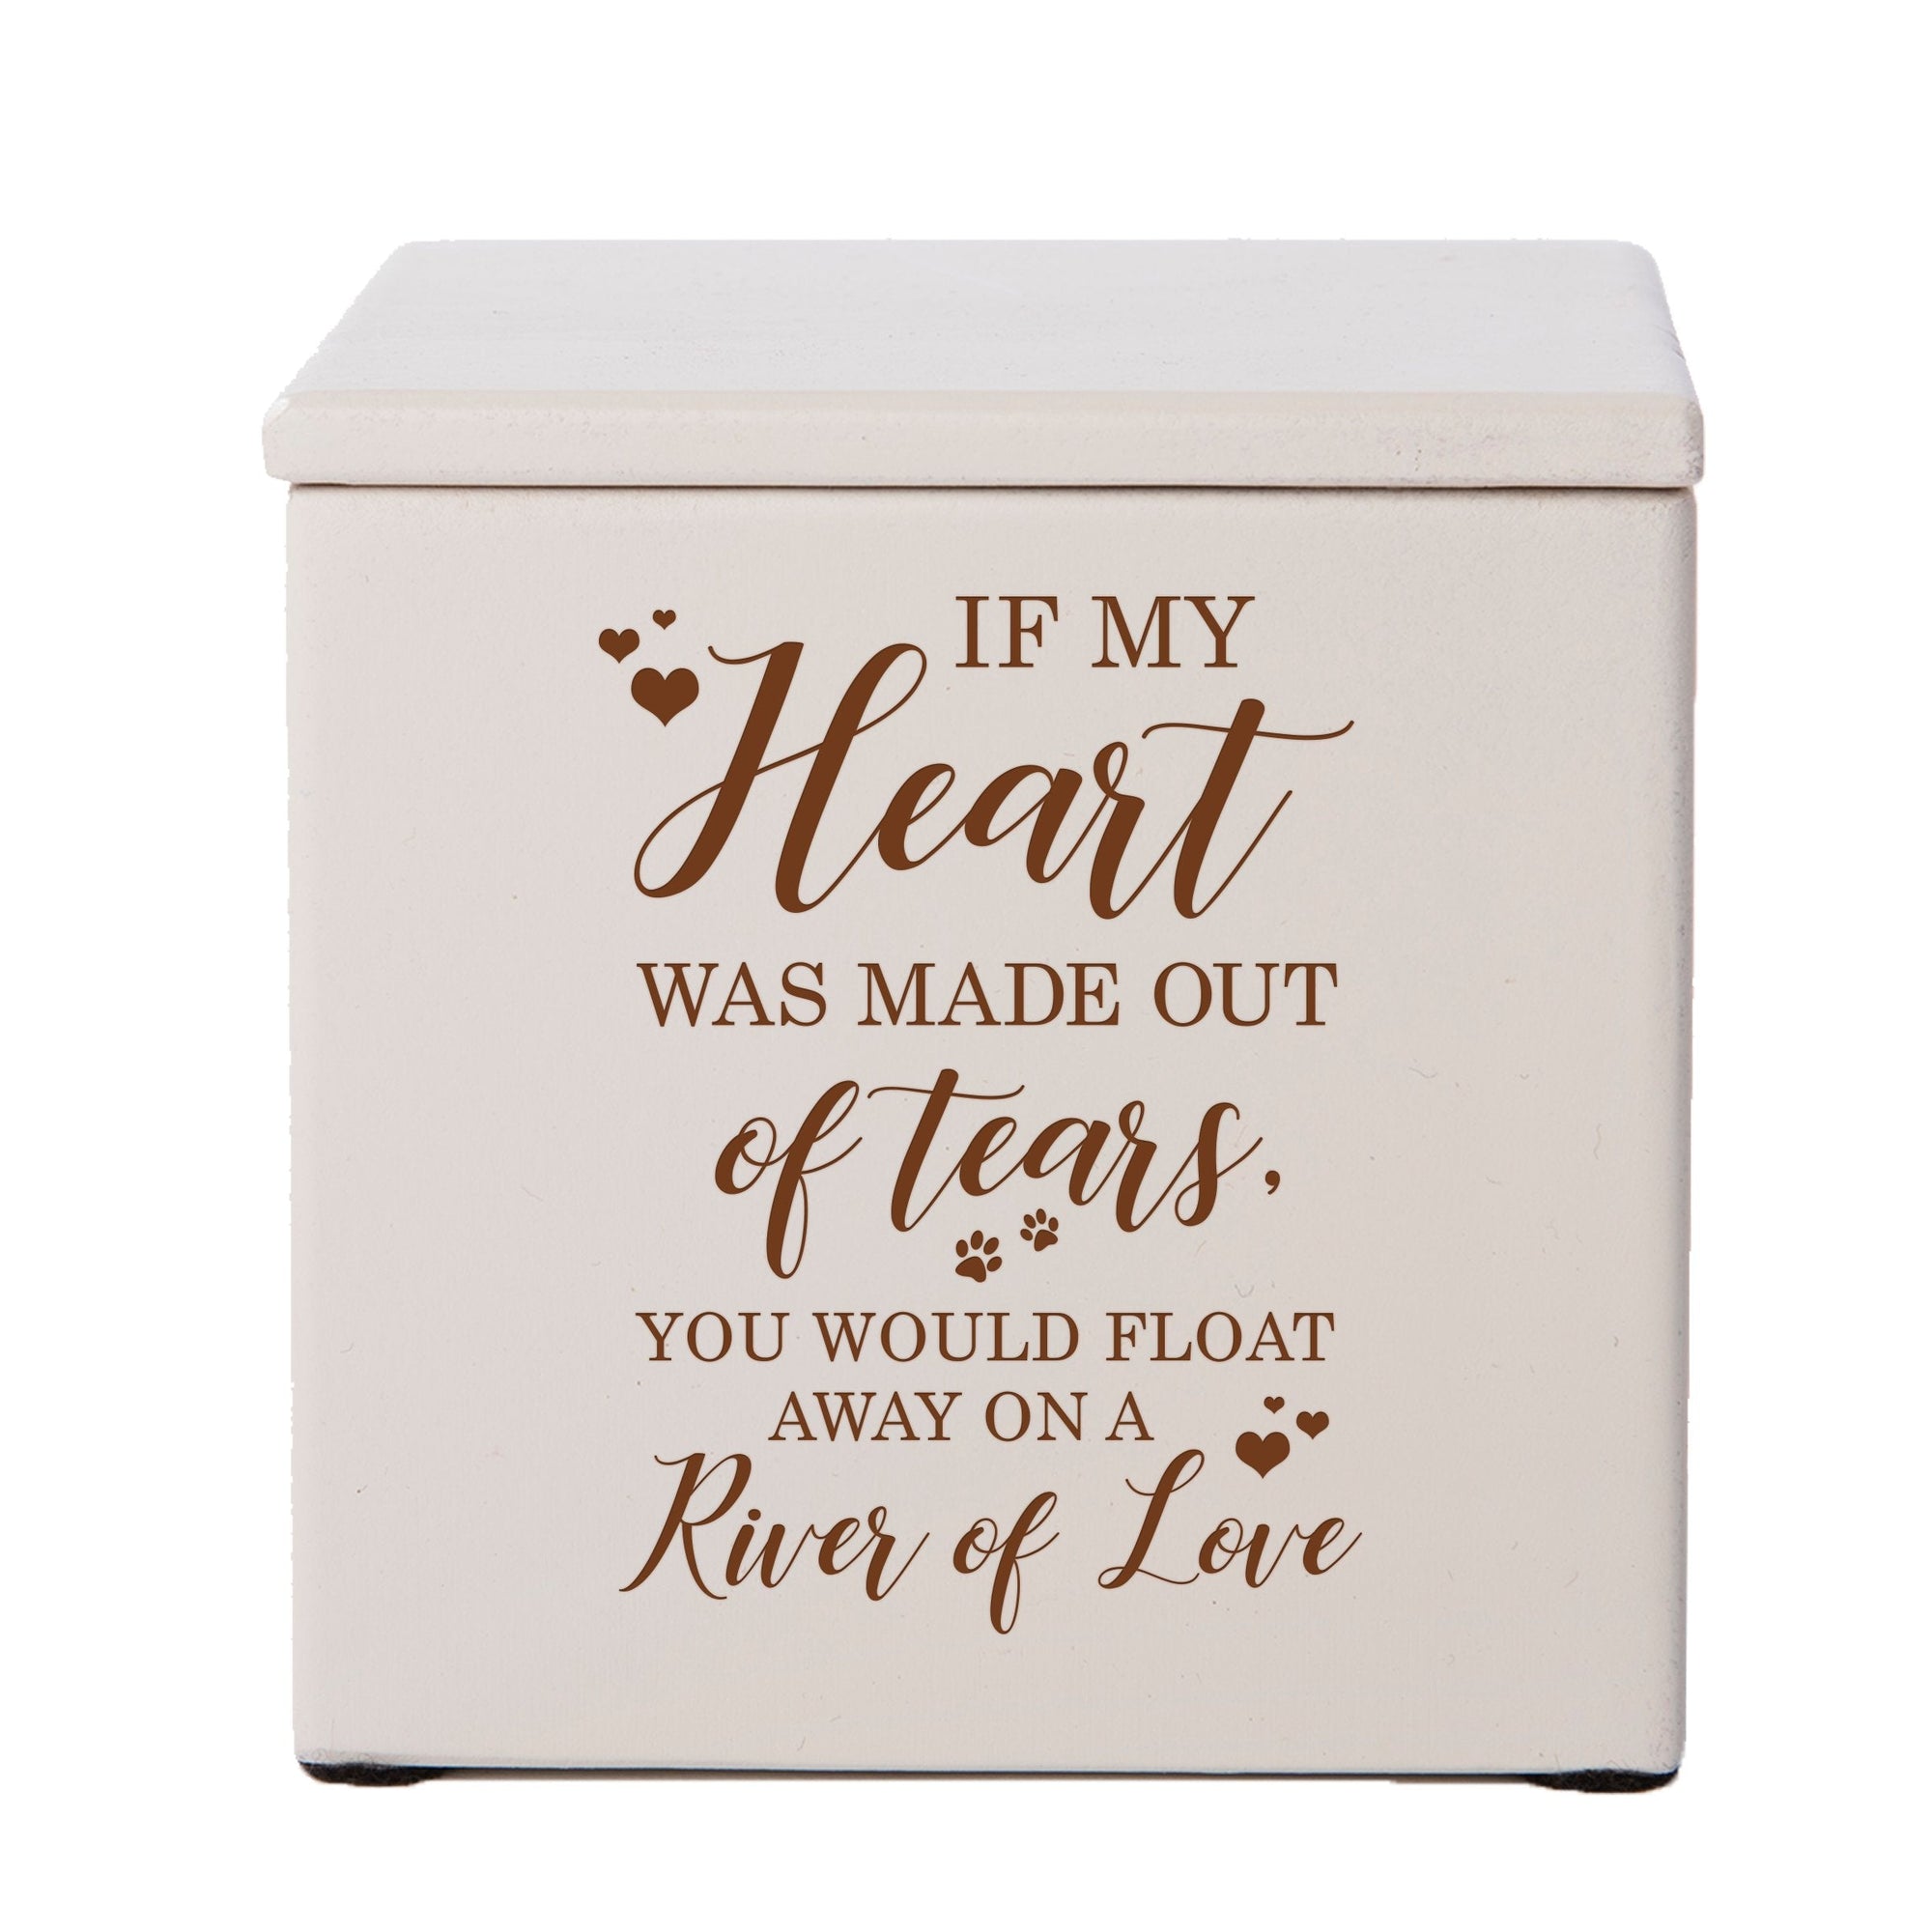 Ivory Pet Memorial 3.5x3.5 Keepsake Urn with phrase "If My Heart Was Made Out of Tears"